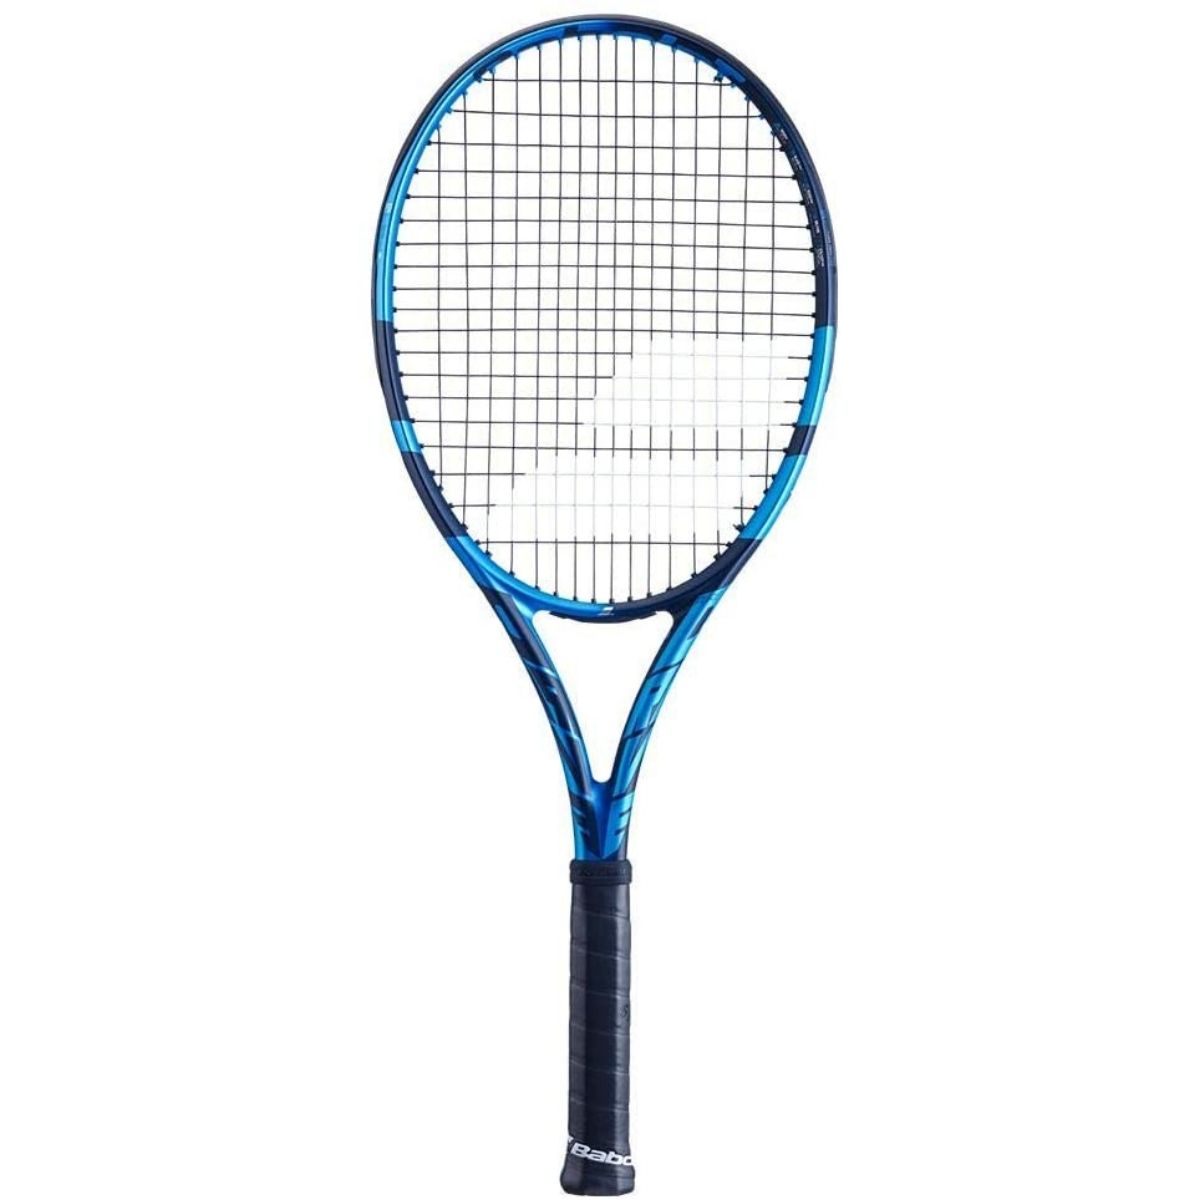 The Best Tennis Rackets Options: Babolat Pure Drive (2021)